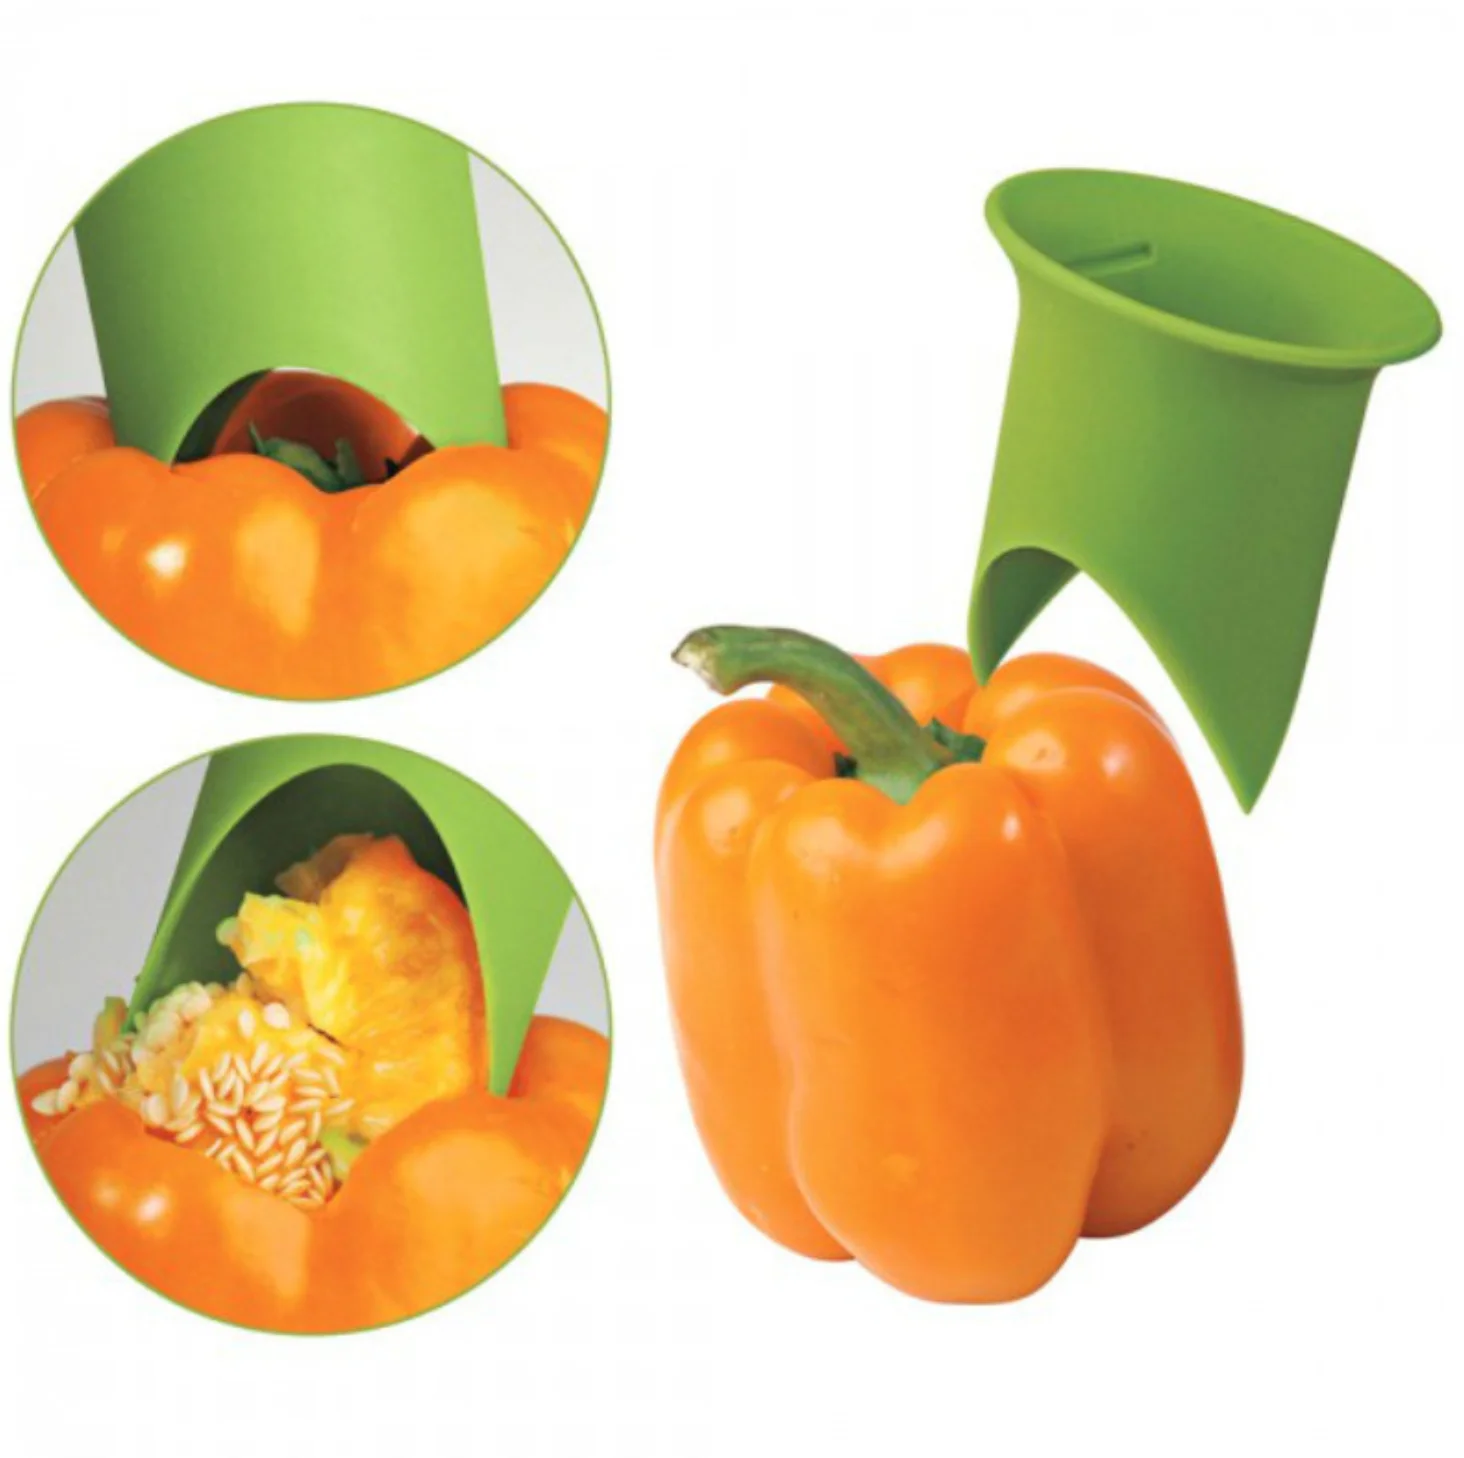 

H975 Home Kitchen Cooking Tools Plastic Chilis Cutter Peppers Corer Multi Sizes Chili Jalapeno Bell Pepper Seed Remover, Multi colour